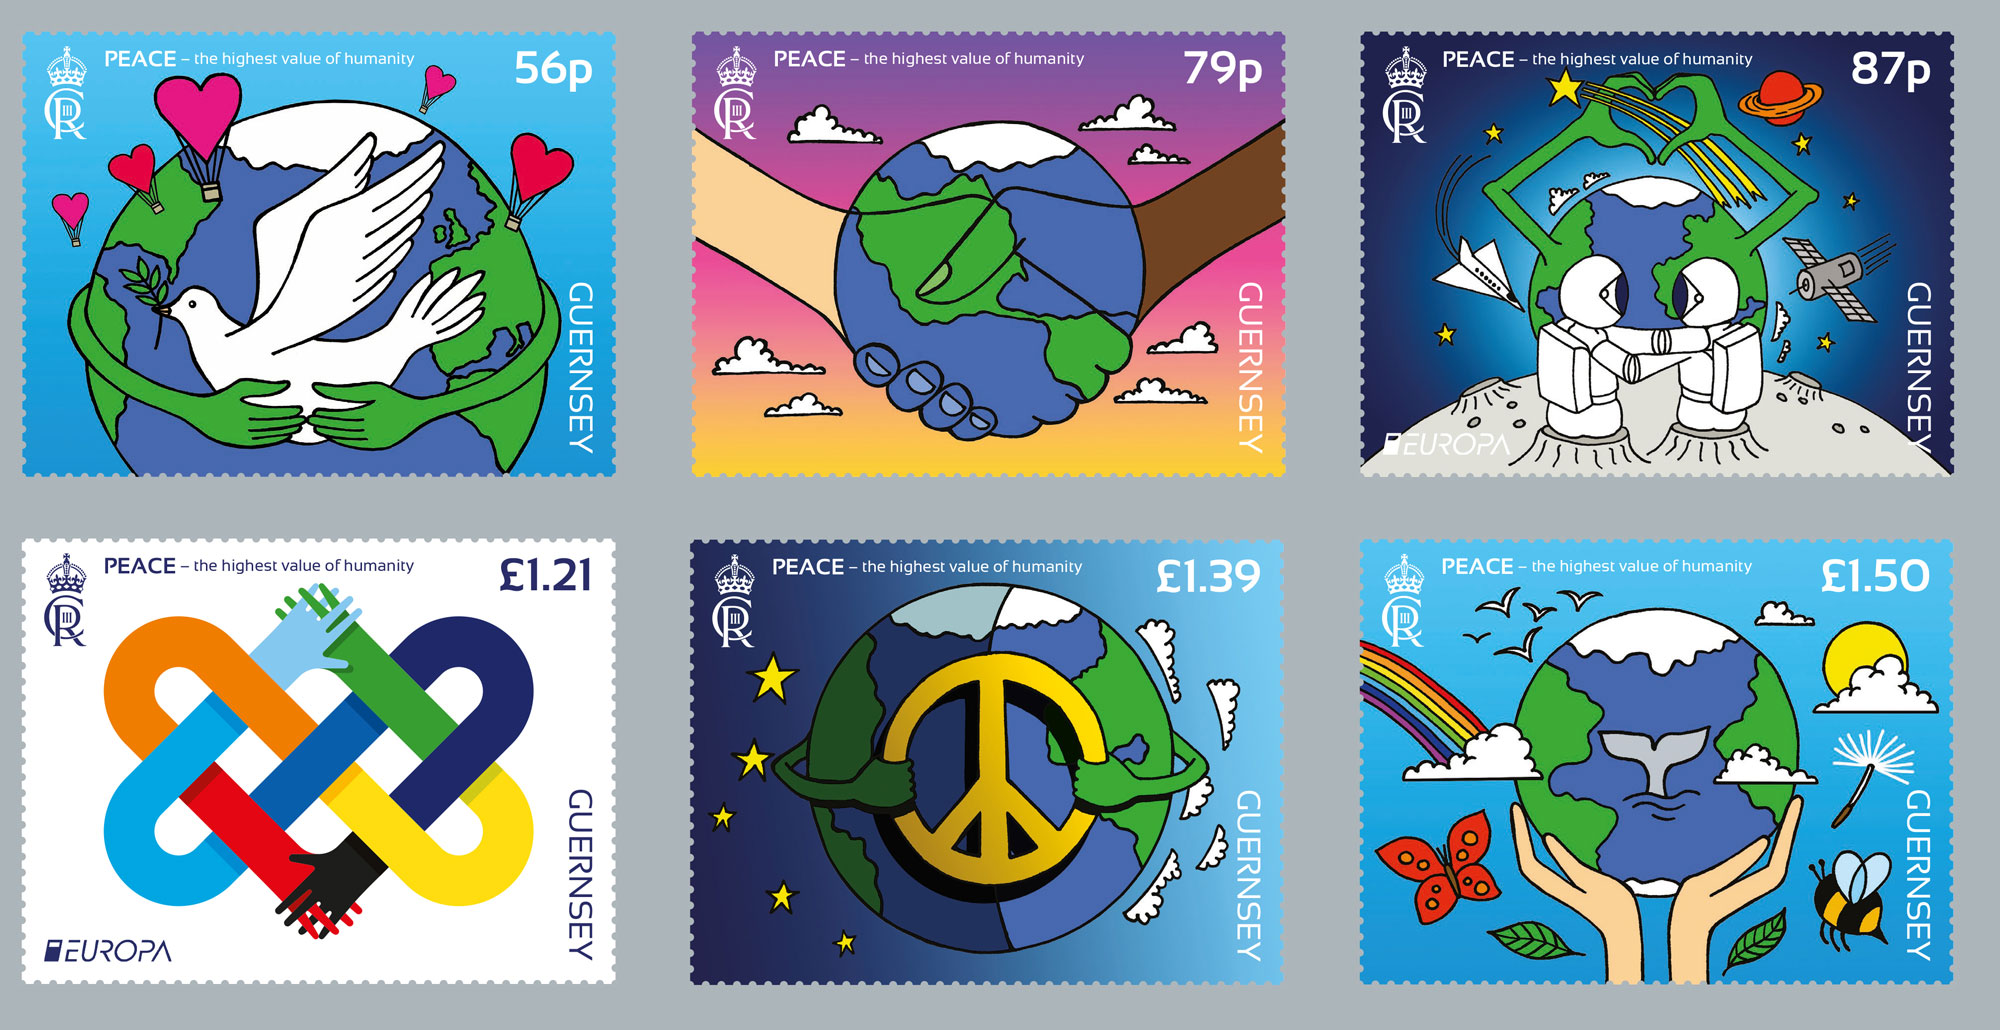 Guernsey stamps depict symbols of peace